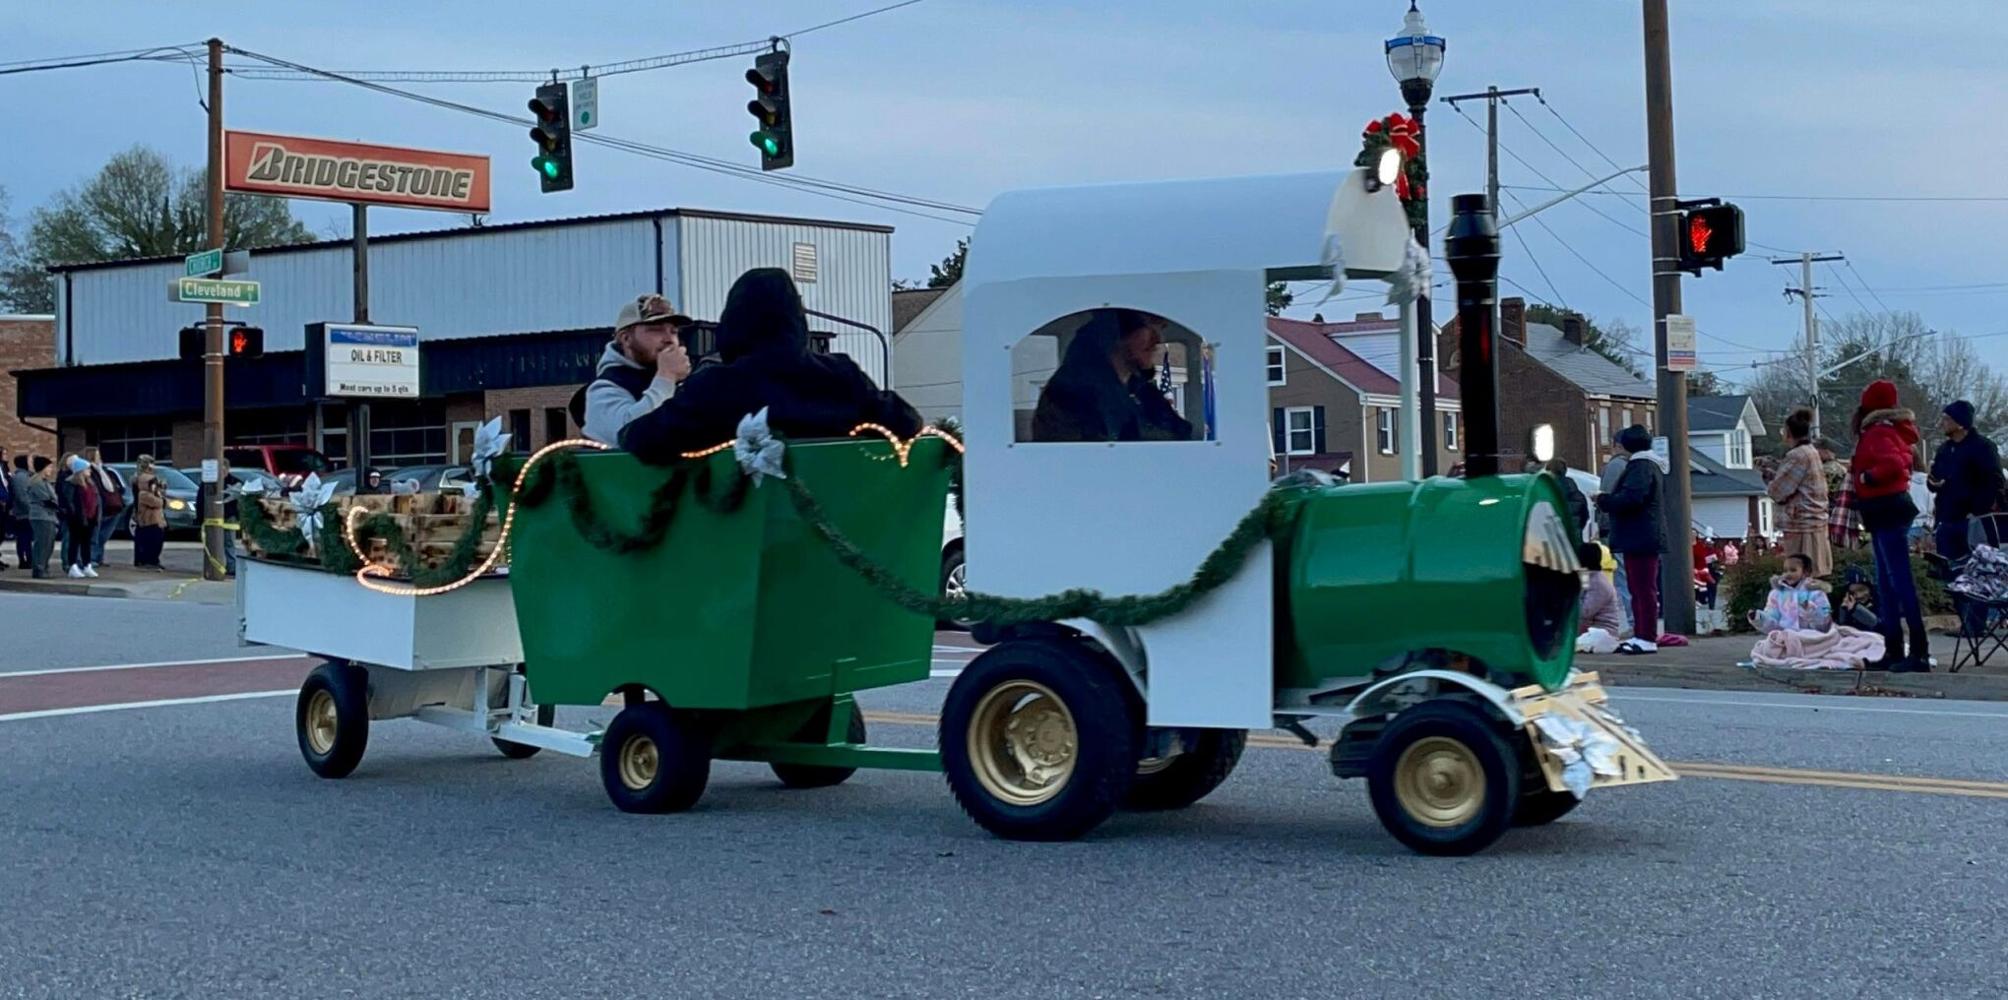 Scenes from the MartinsvilleHenry County Christmas Parade